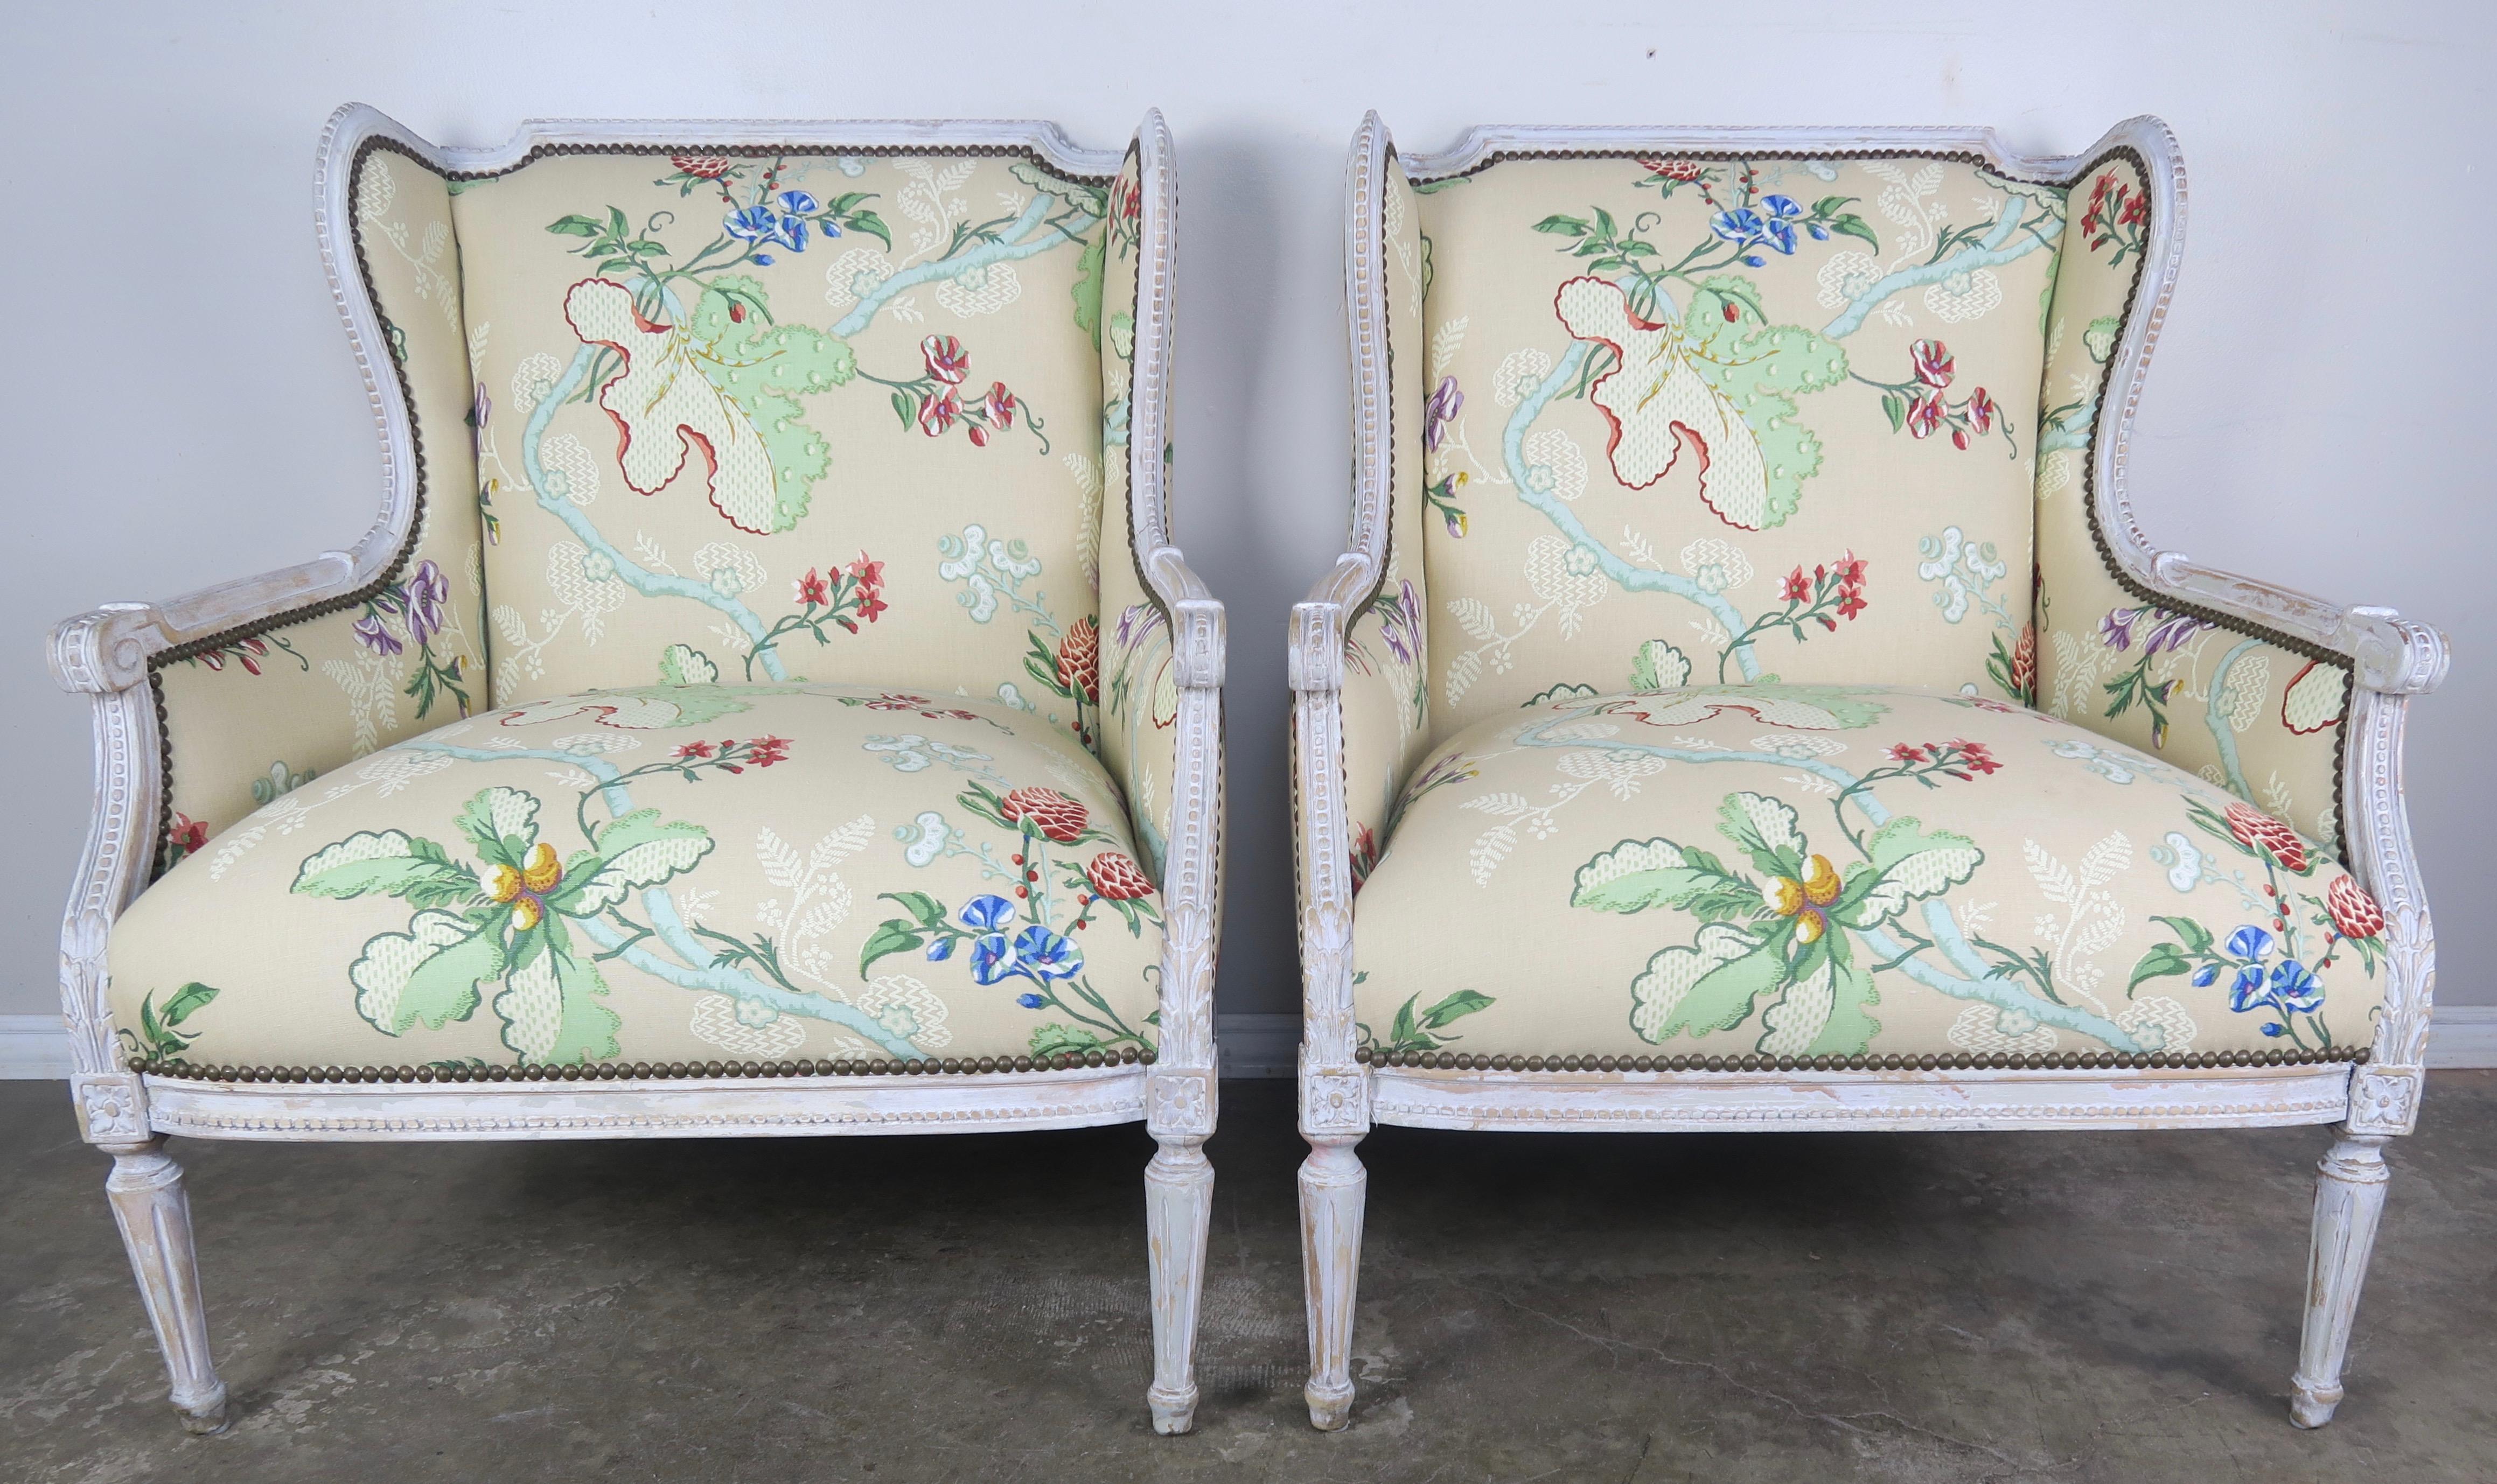 Pair of early 20th century French painted wingback armchairs standing on four straight fluted legs. The armchairs are painted in a French gray that is worn throughout exposing the wood underneath. The chairs are newly upholstered in a vintage (but